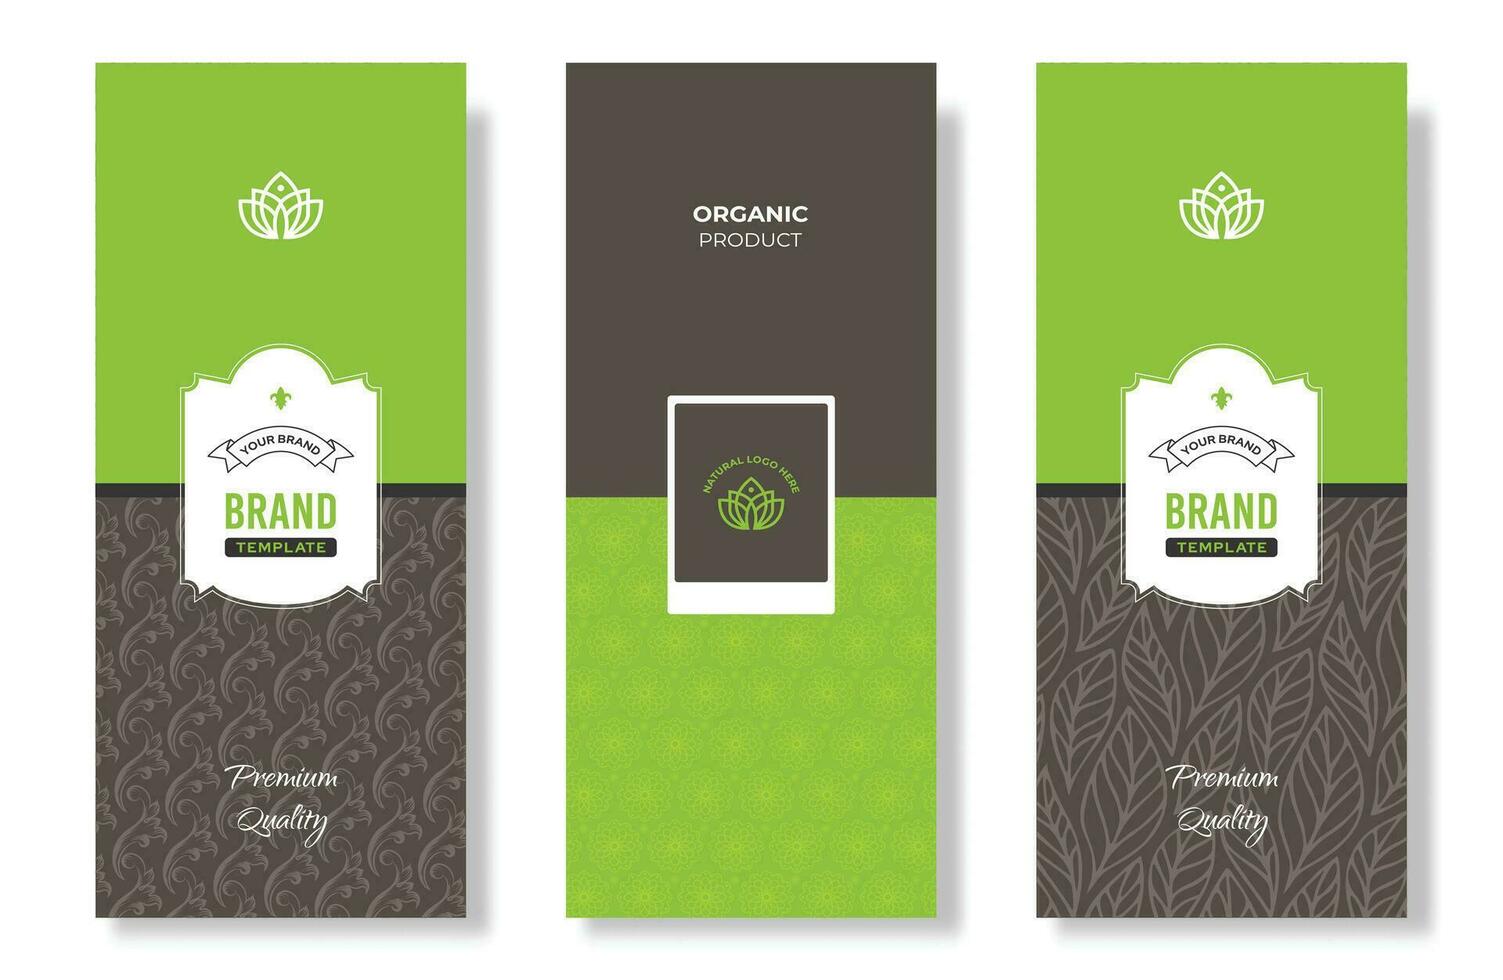 Label pattern for spice food packaging, cosmetics, beauty products, organic food and healthy food with leaves and flowers, dry fruit packaging, green label packaging design template illustration vector